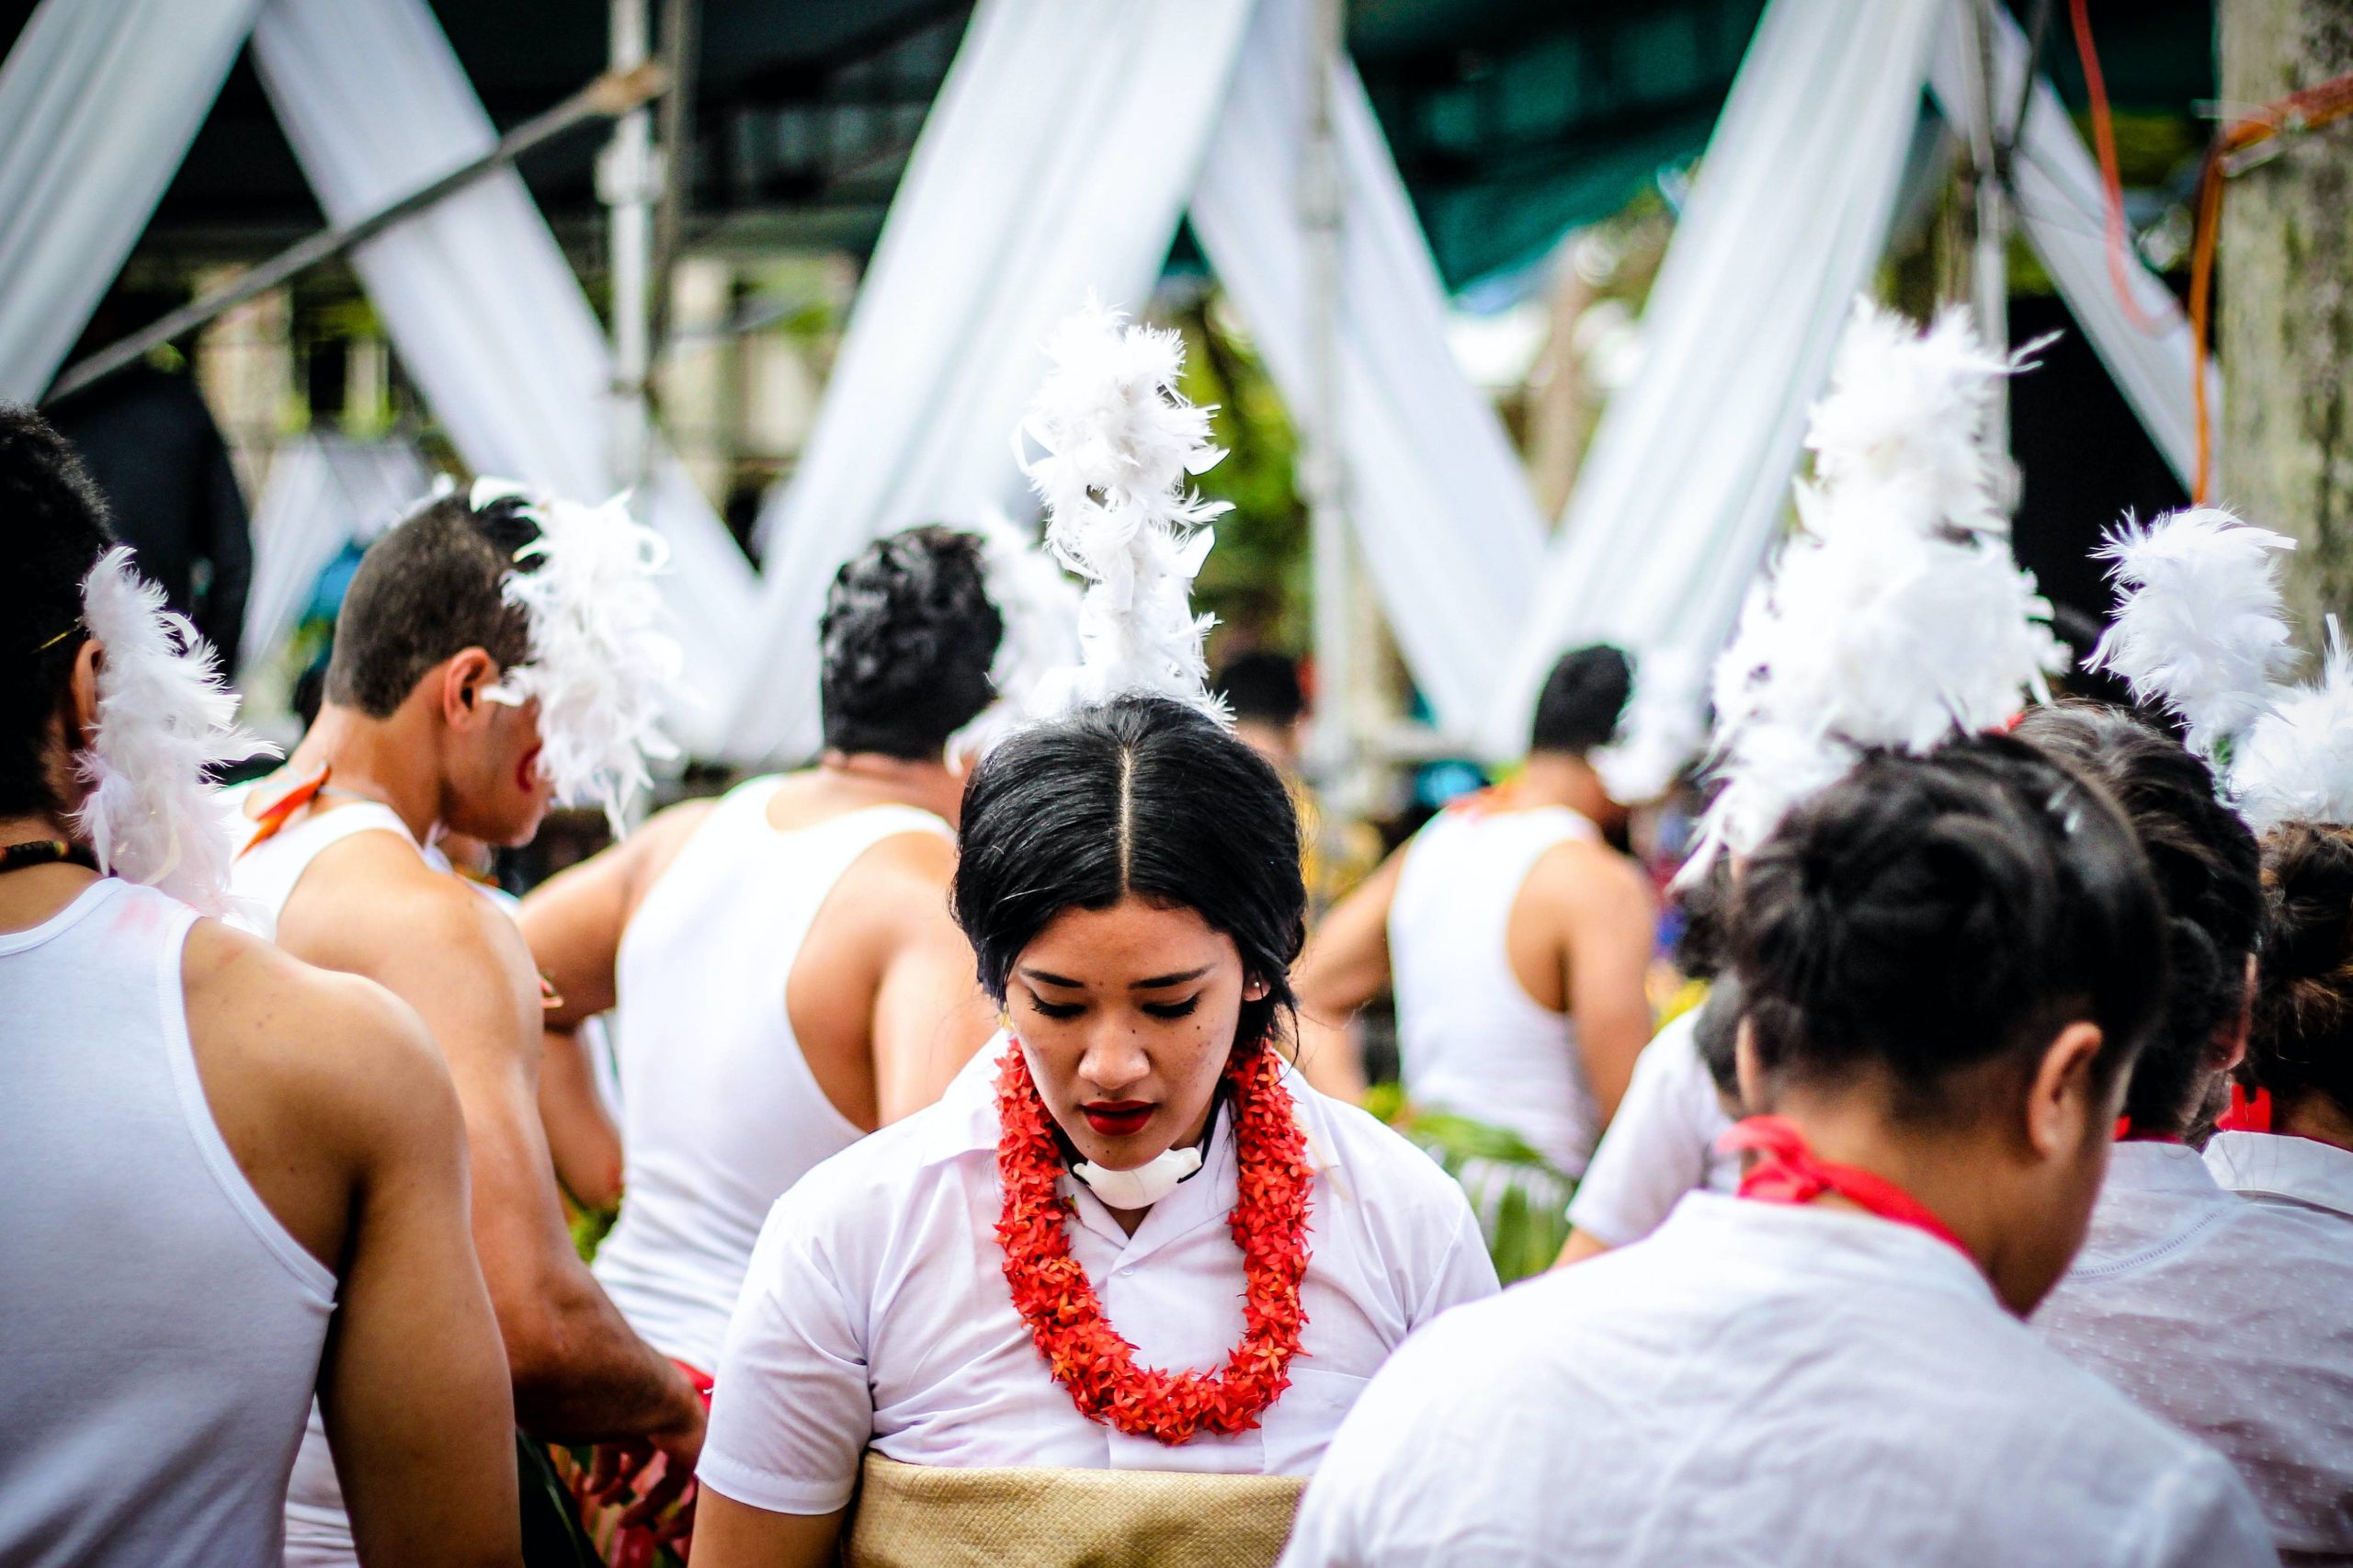 A cultural ceremony in Tonga in Oceanian Polynesia